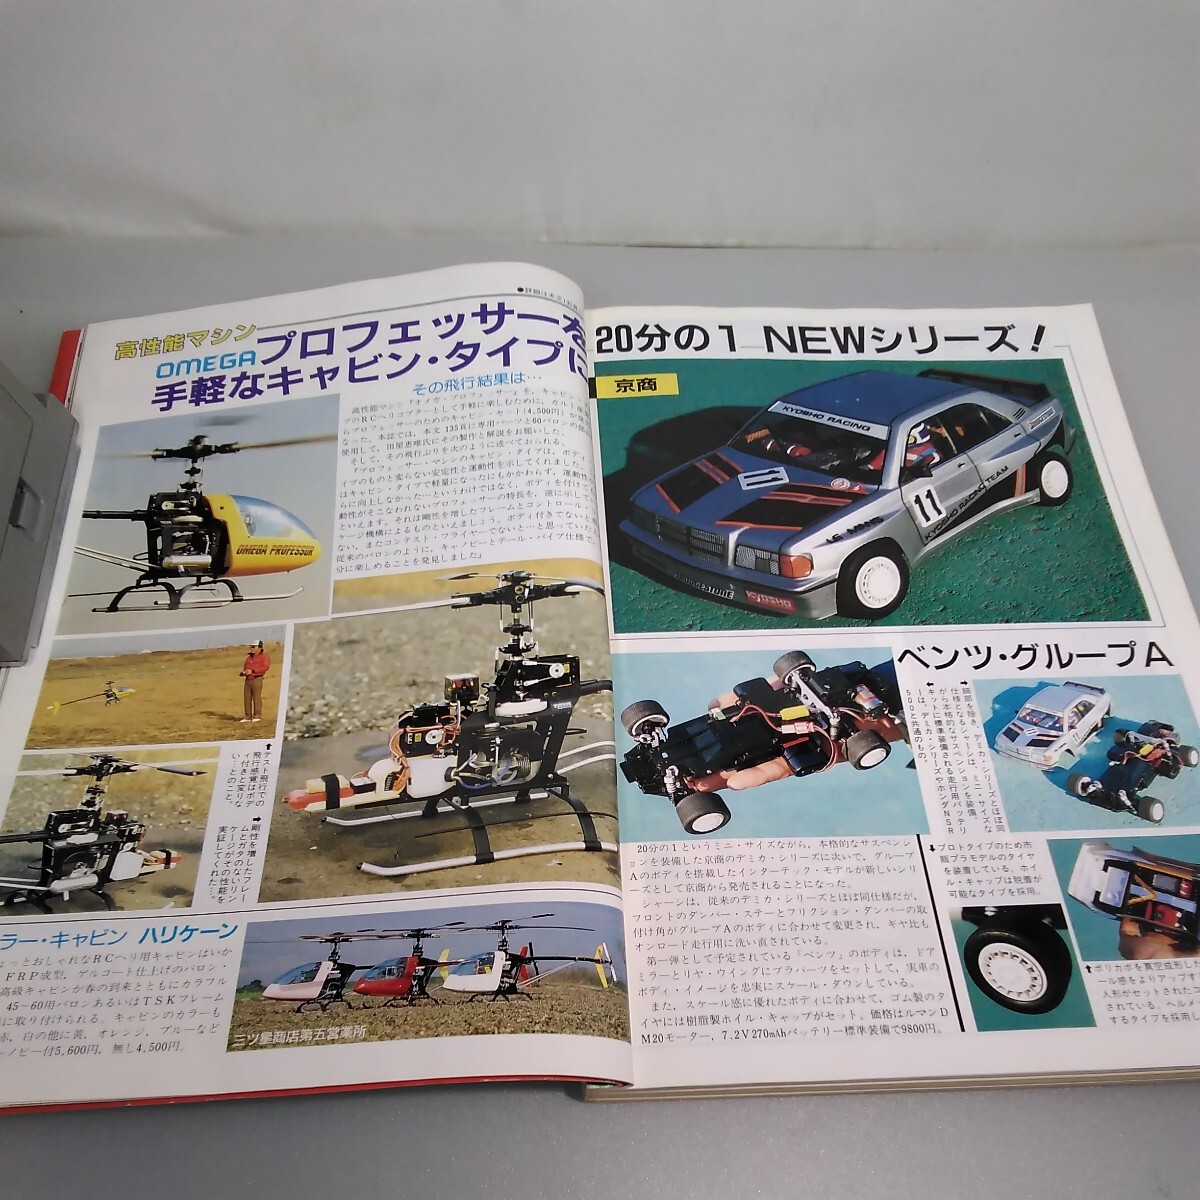 [ that time thing ] radio-controller technology *1988 year 3 month number no. 28 volume no. 5 number through volume 365 number * Showa era 63 year 3 month issue *Radio Control Technique* radio wave experiment company * free shipping * immediately shipping 